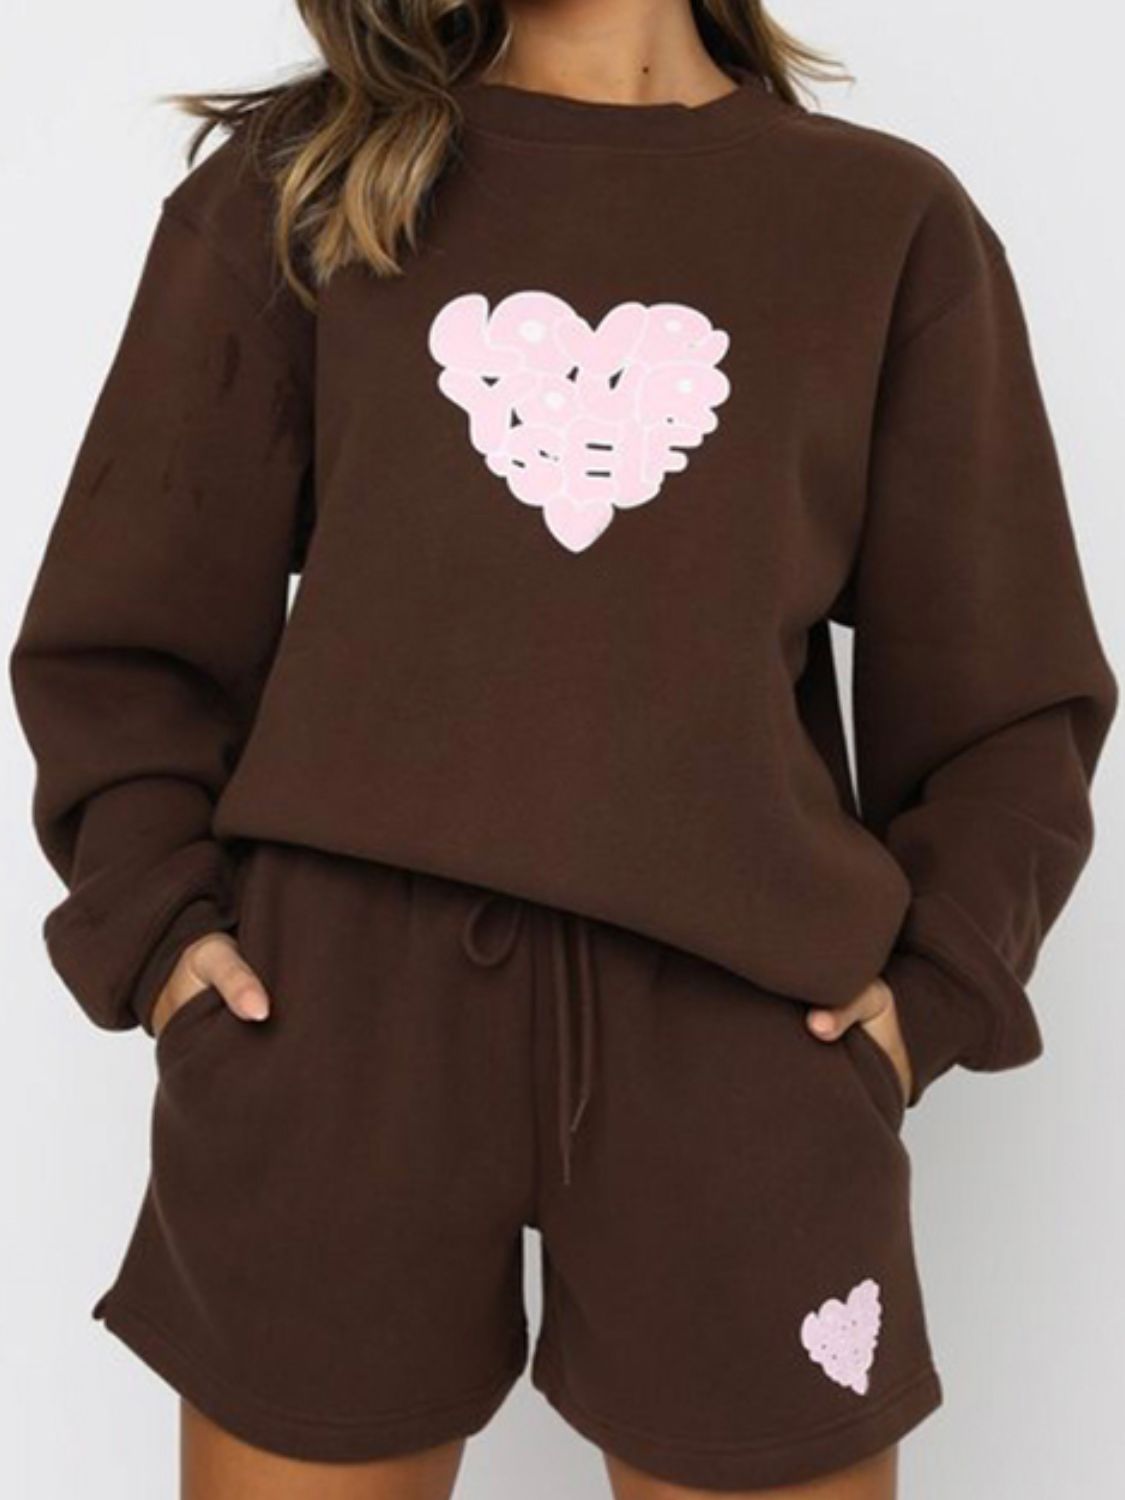 Graphic Sweatshirt and Shorts Set with Pockets - Chocolate / S Wynter 4 All Seasons